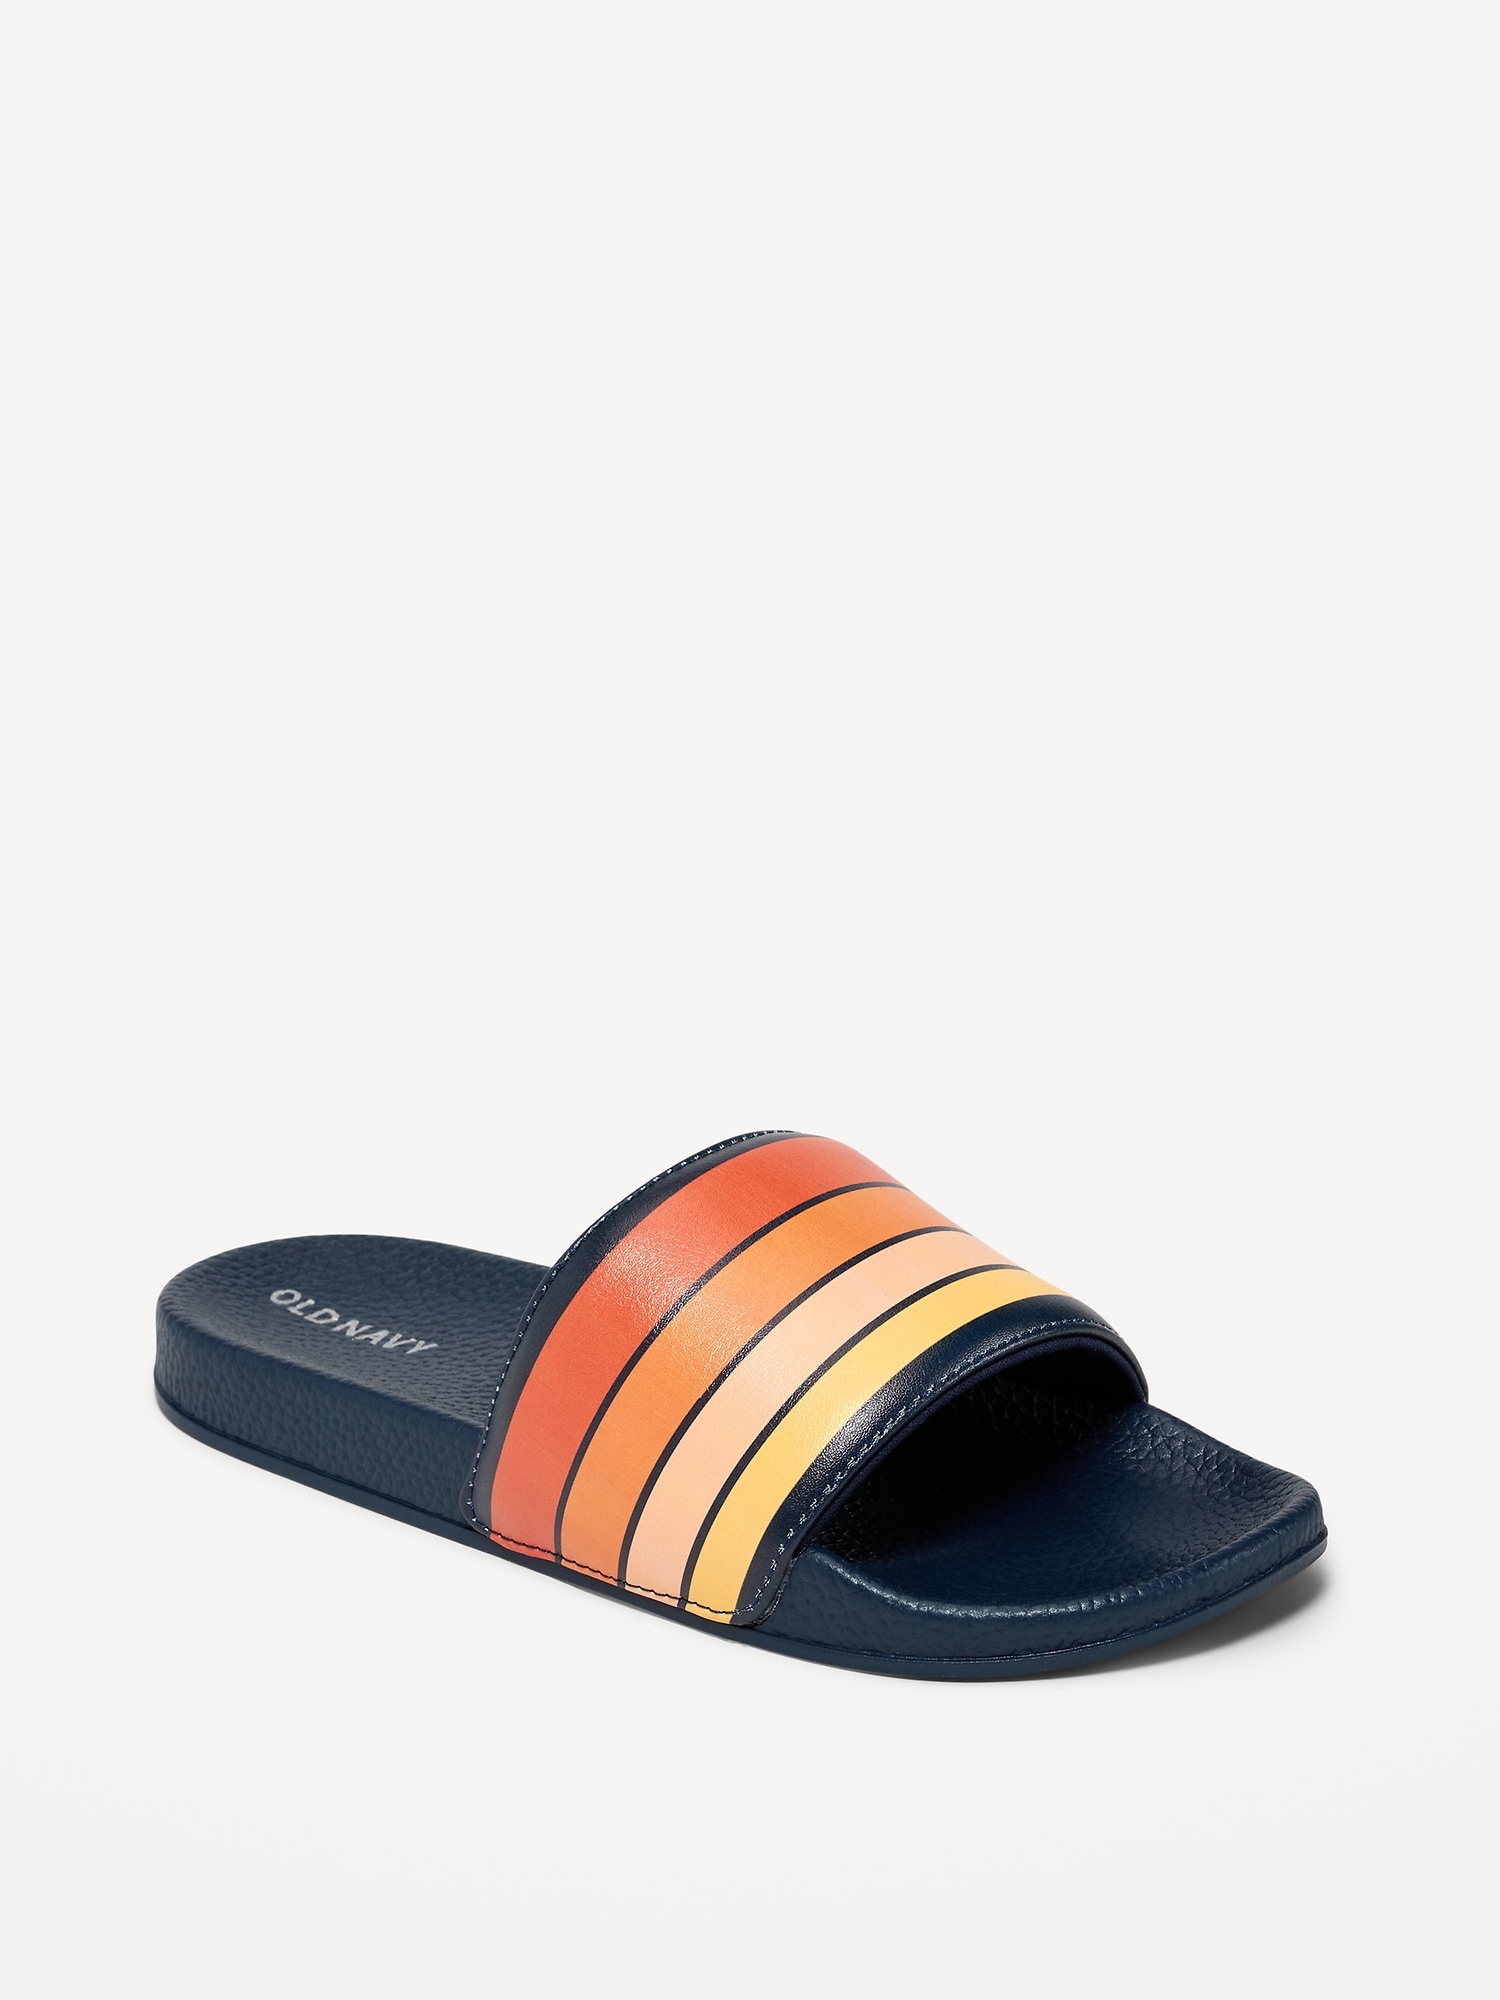 Comfortable Pool Sandals | Old Navy